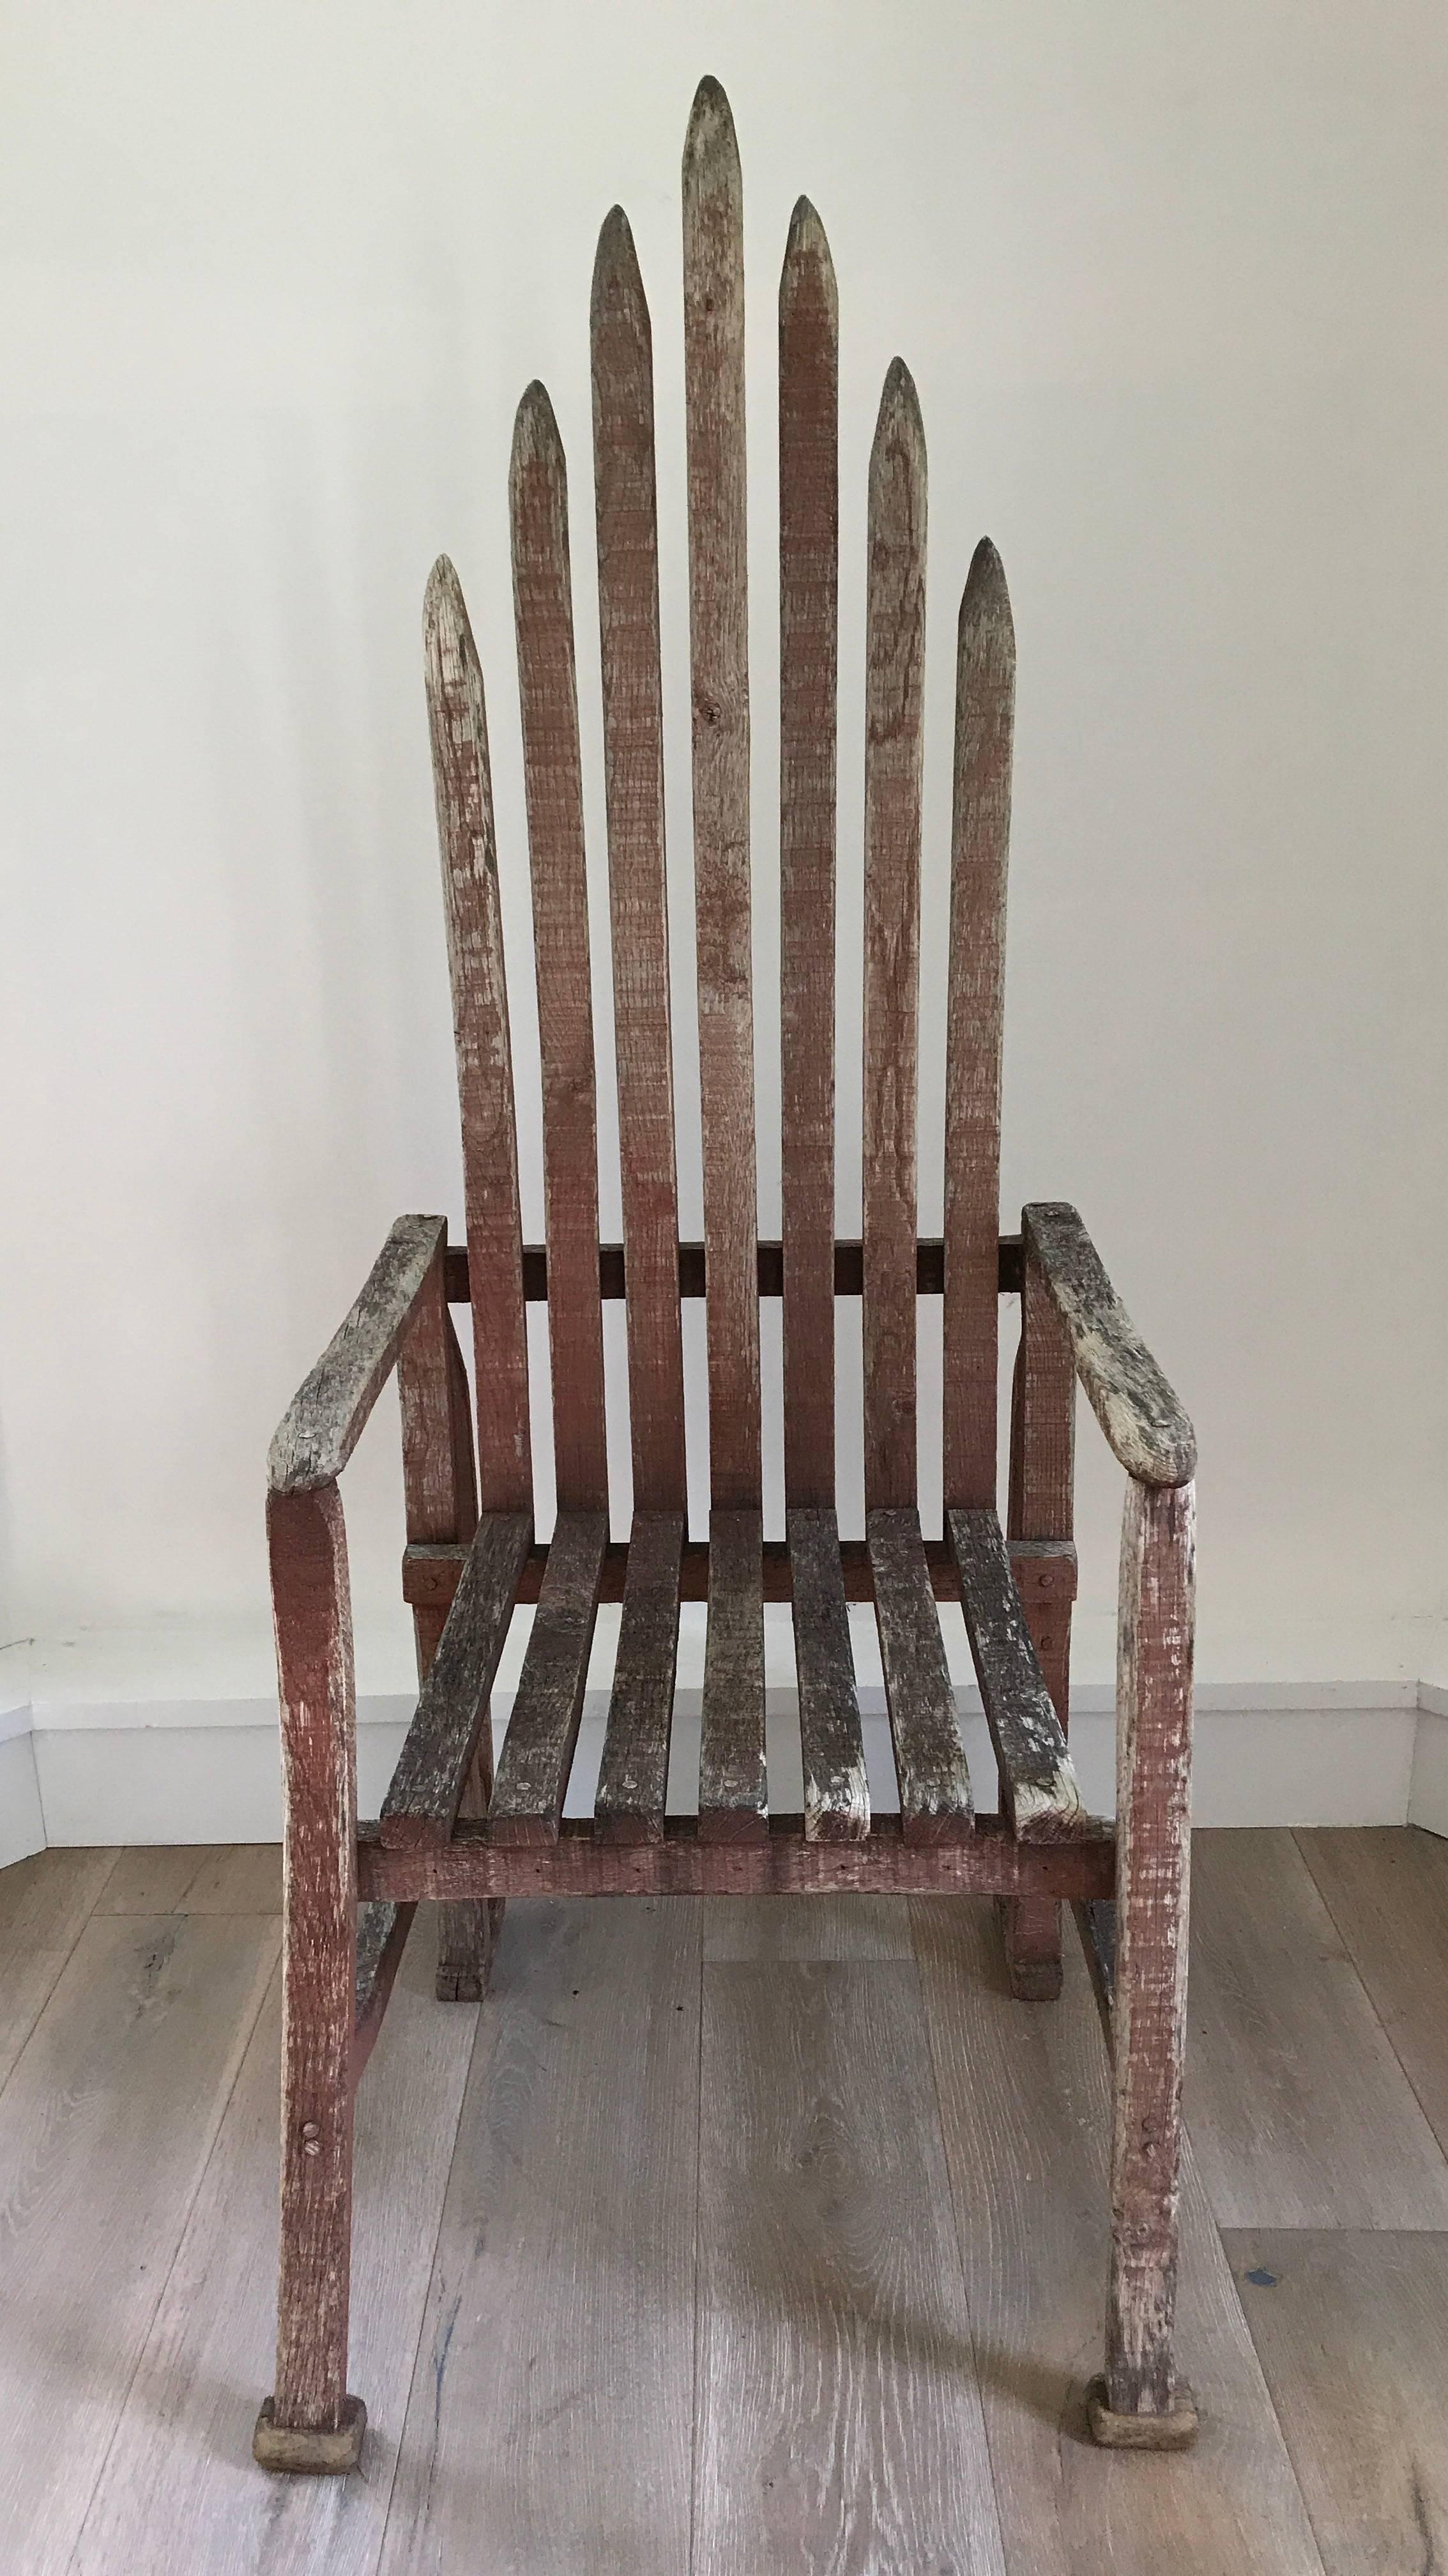 Very unique early 20th century American folk art chair made of reclaimed material. Fabulous patina to weathered frame.